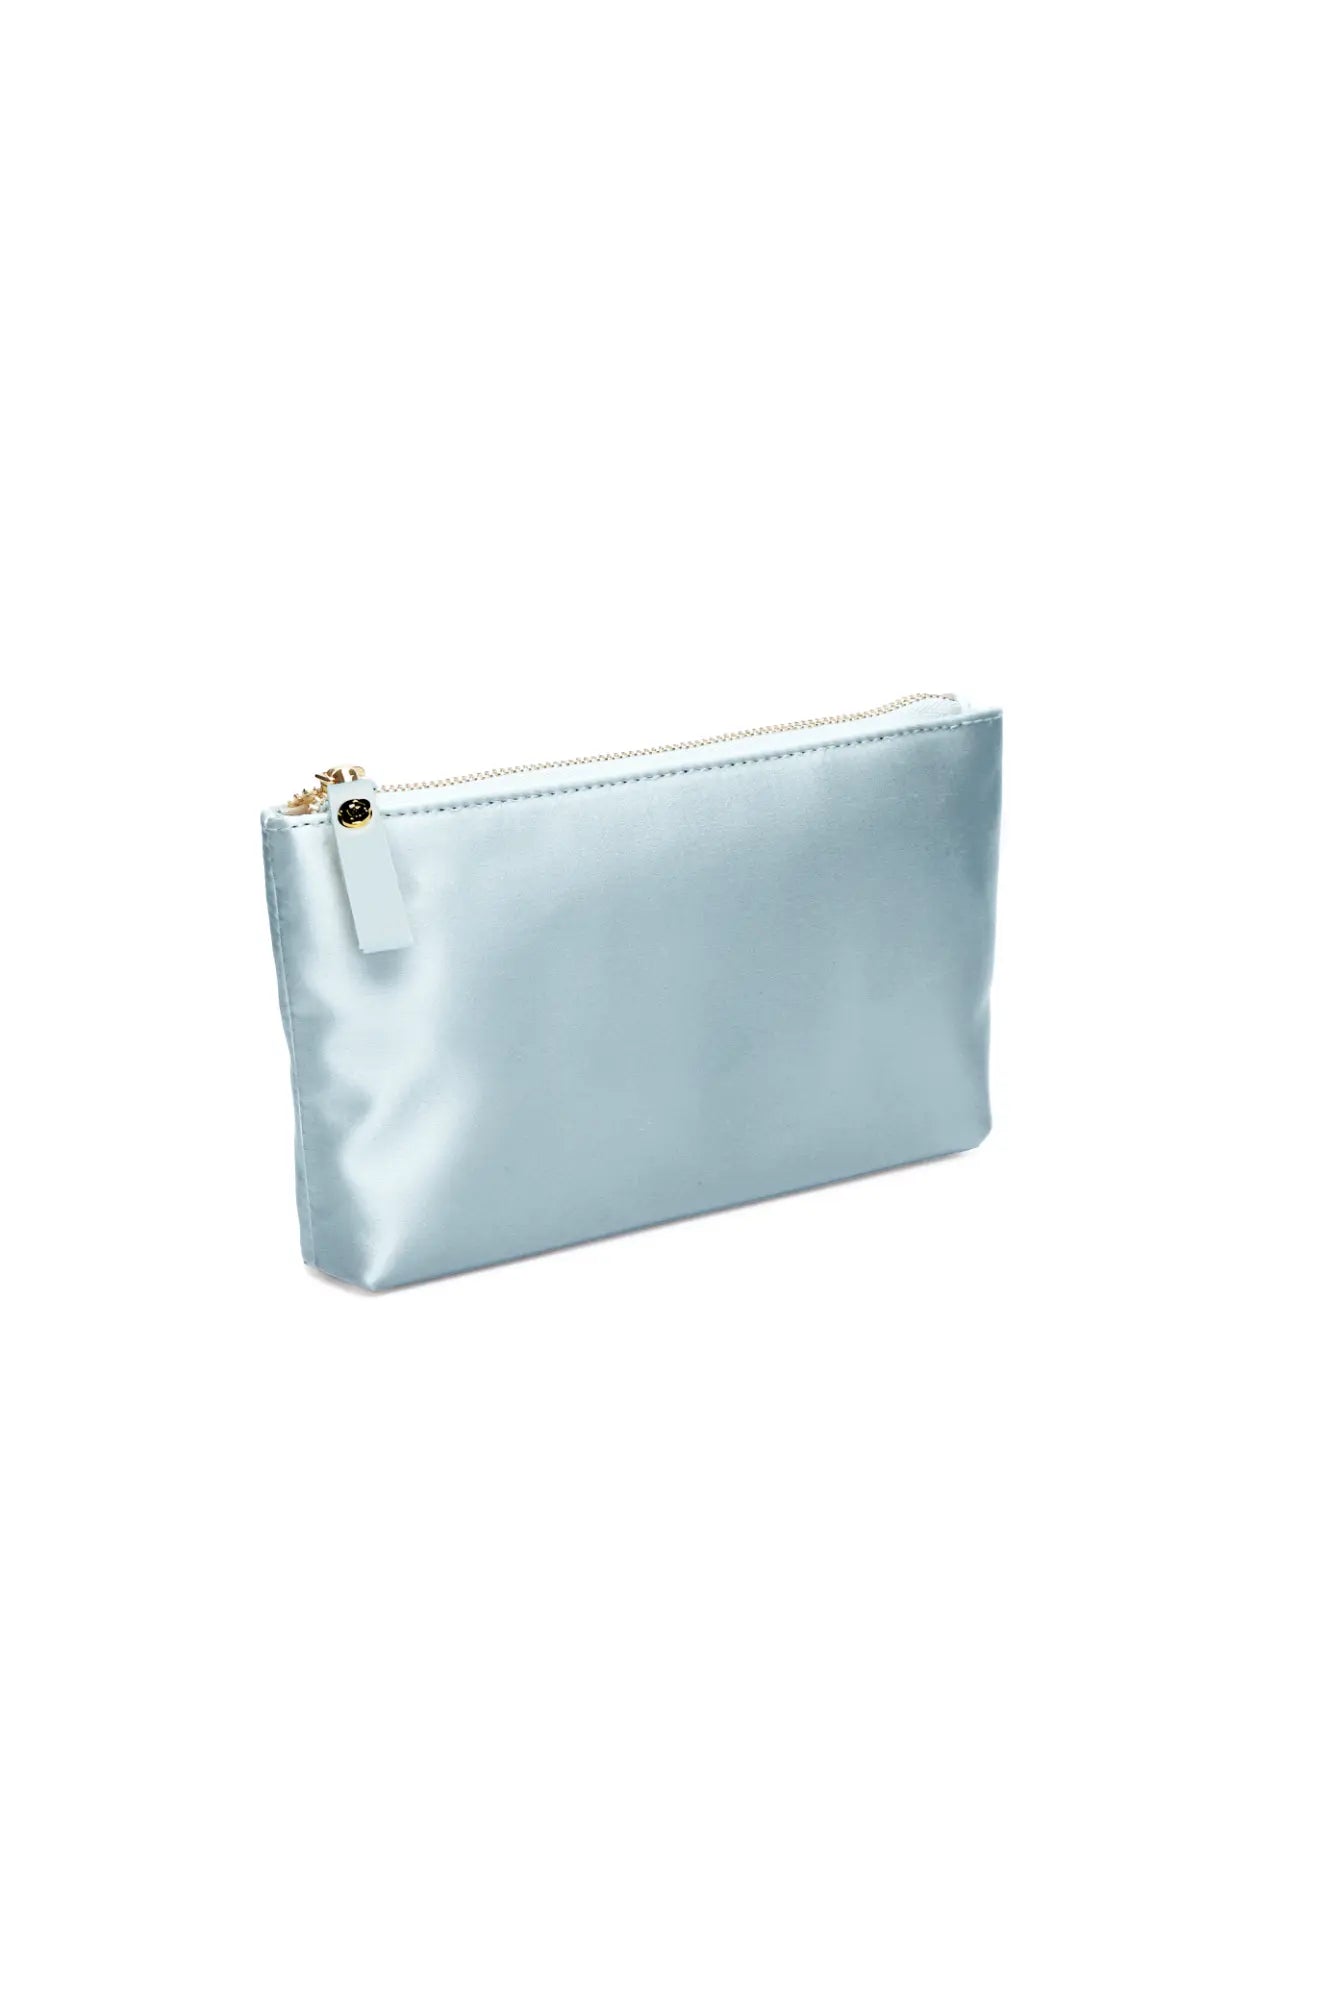 A Mia Acrylic Clutch with Cinderella Blue Pouch from The Bella Rosa Collection with a zipper and a personalized sentiment plaque on a white background.